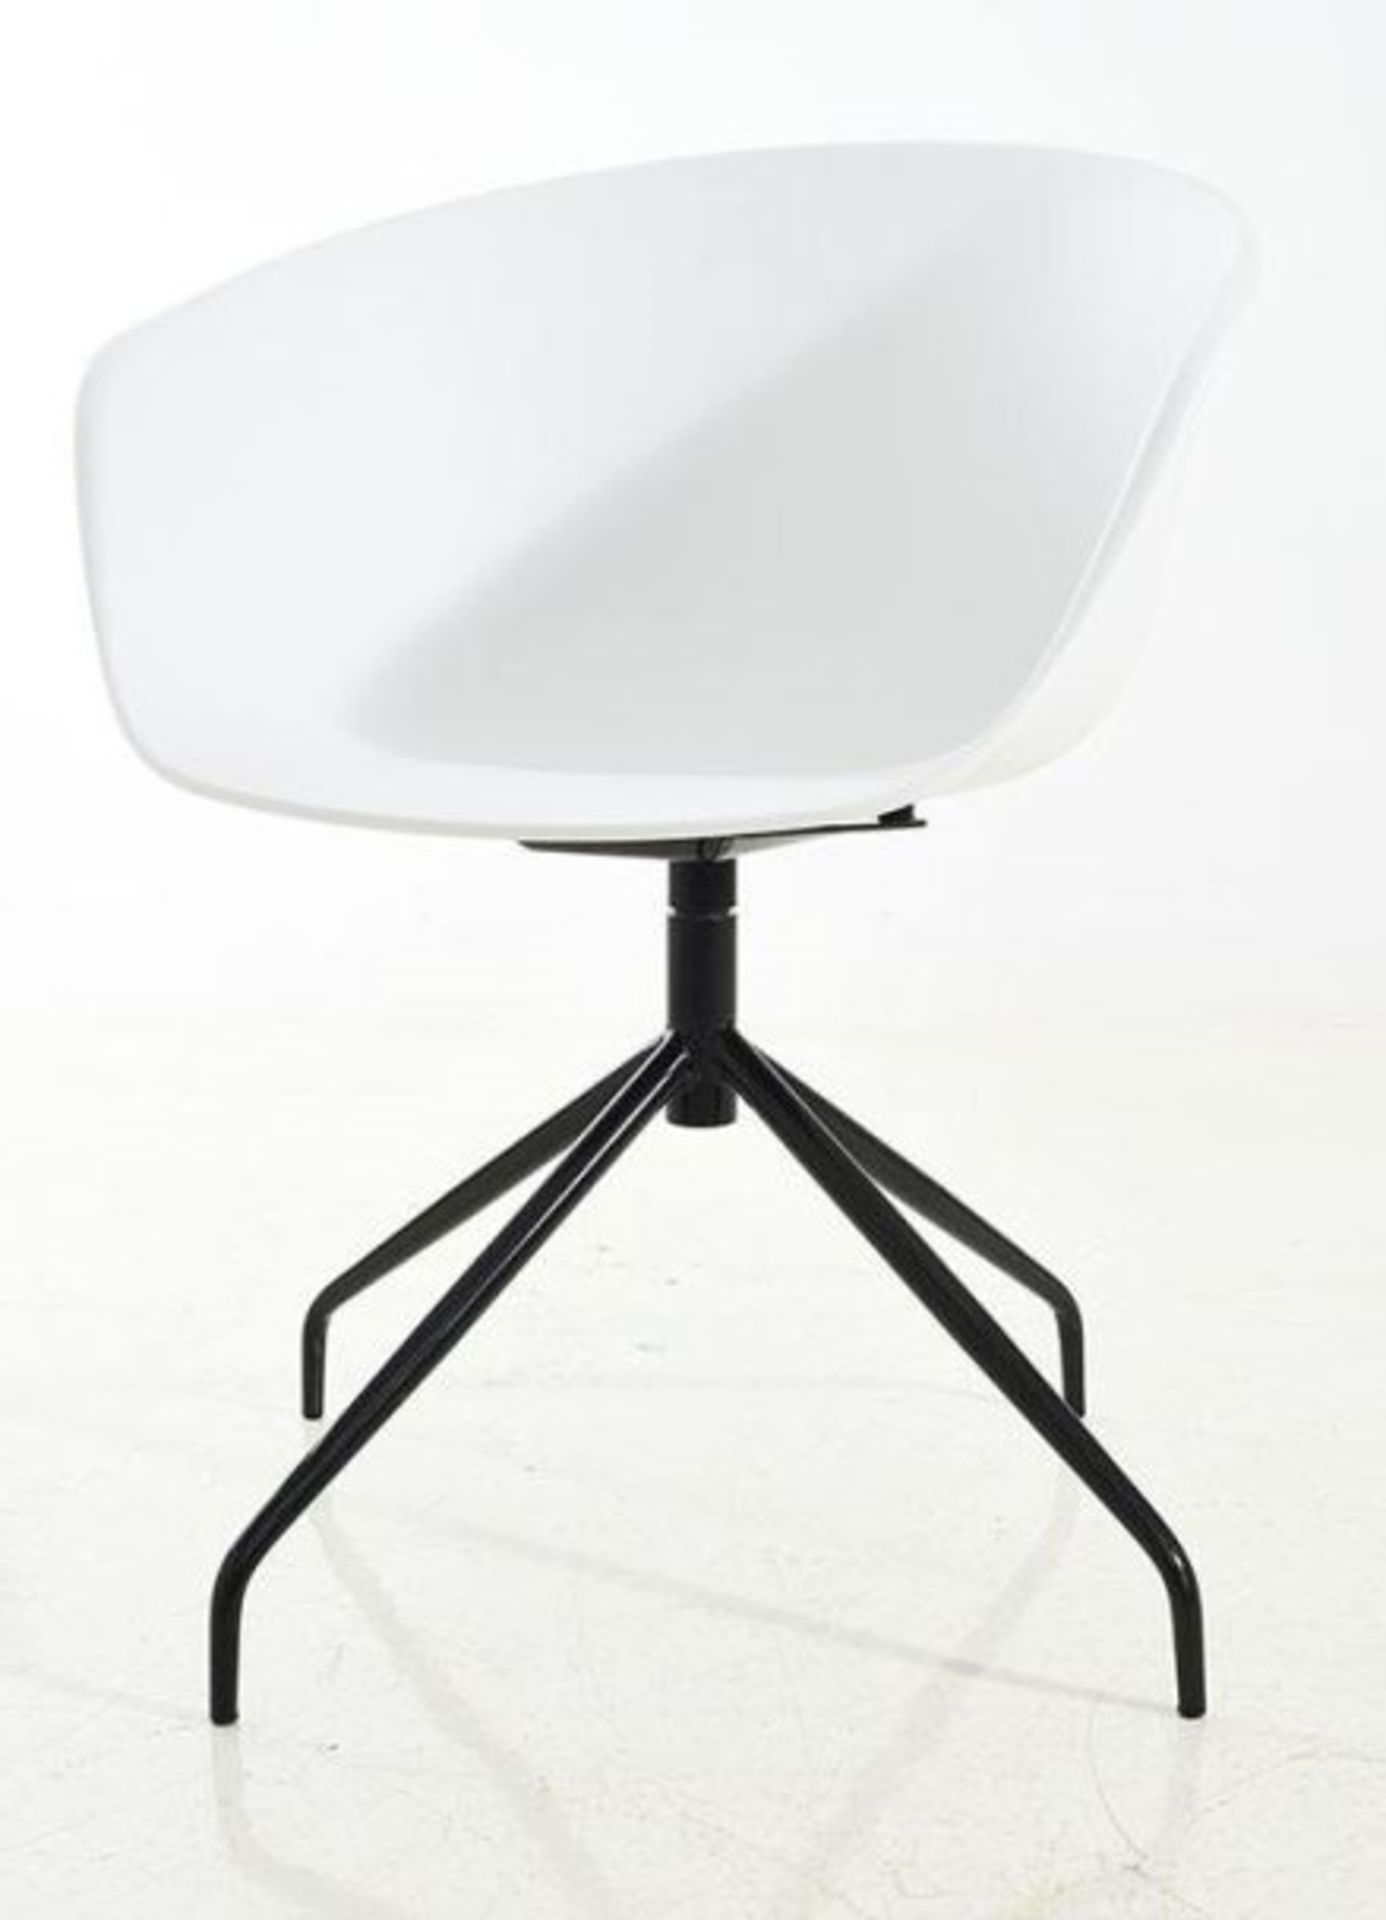 A Set Of 4 x Elegant Dining Chairs With White Curved Seats And Black Metal Bases - Image 2 of 4